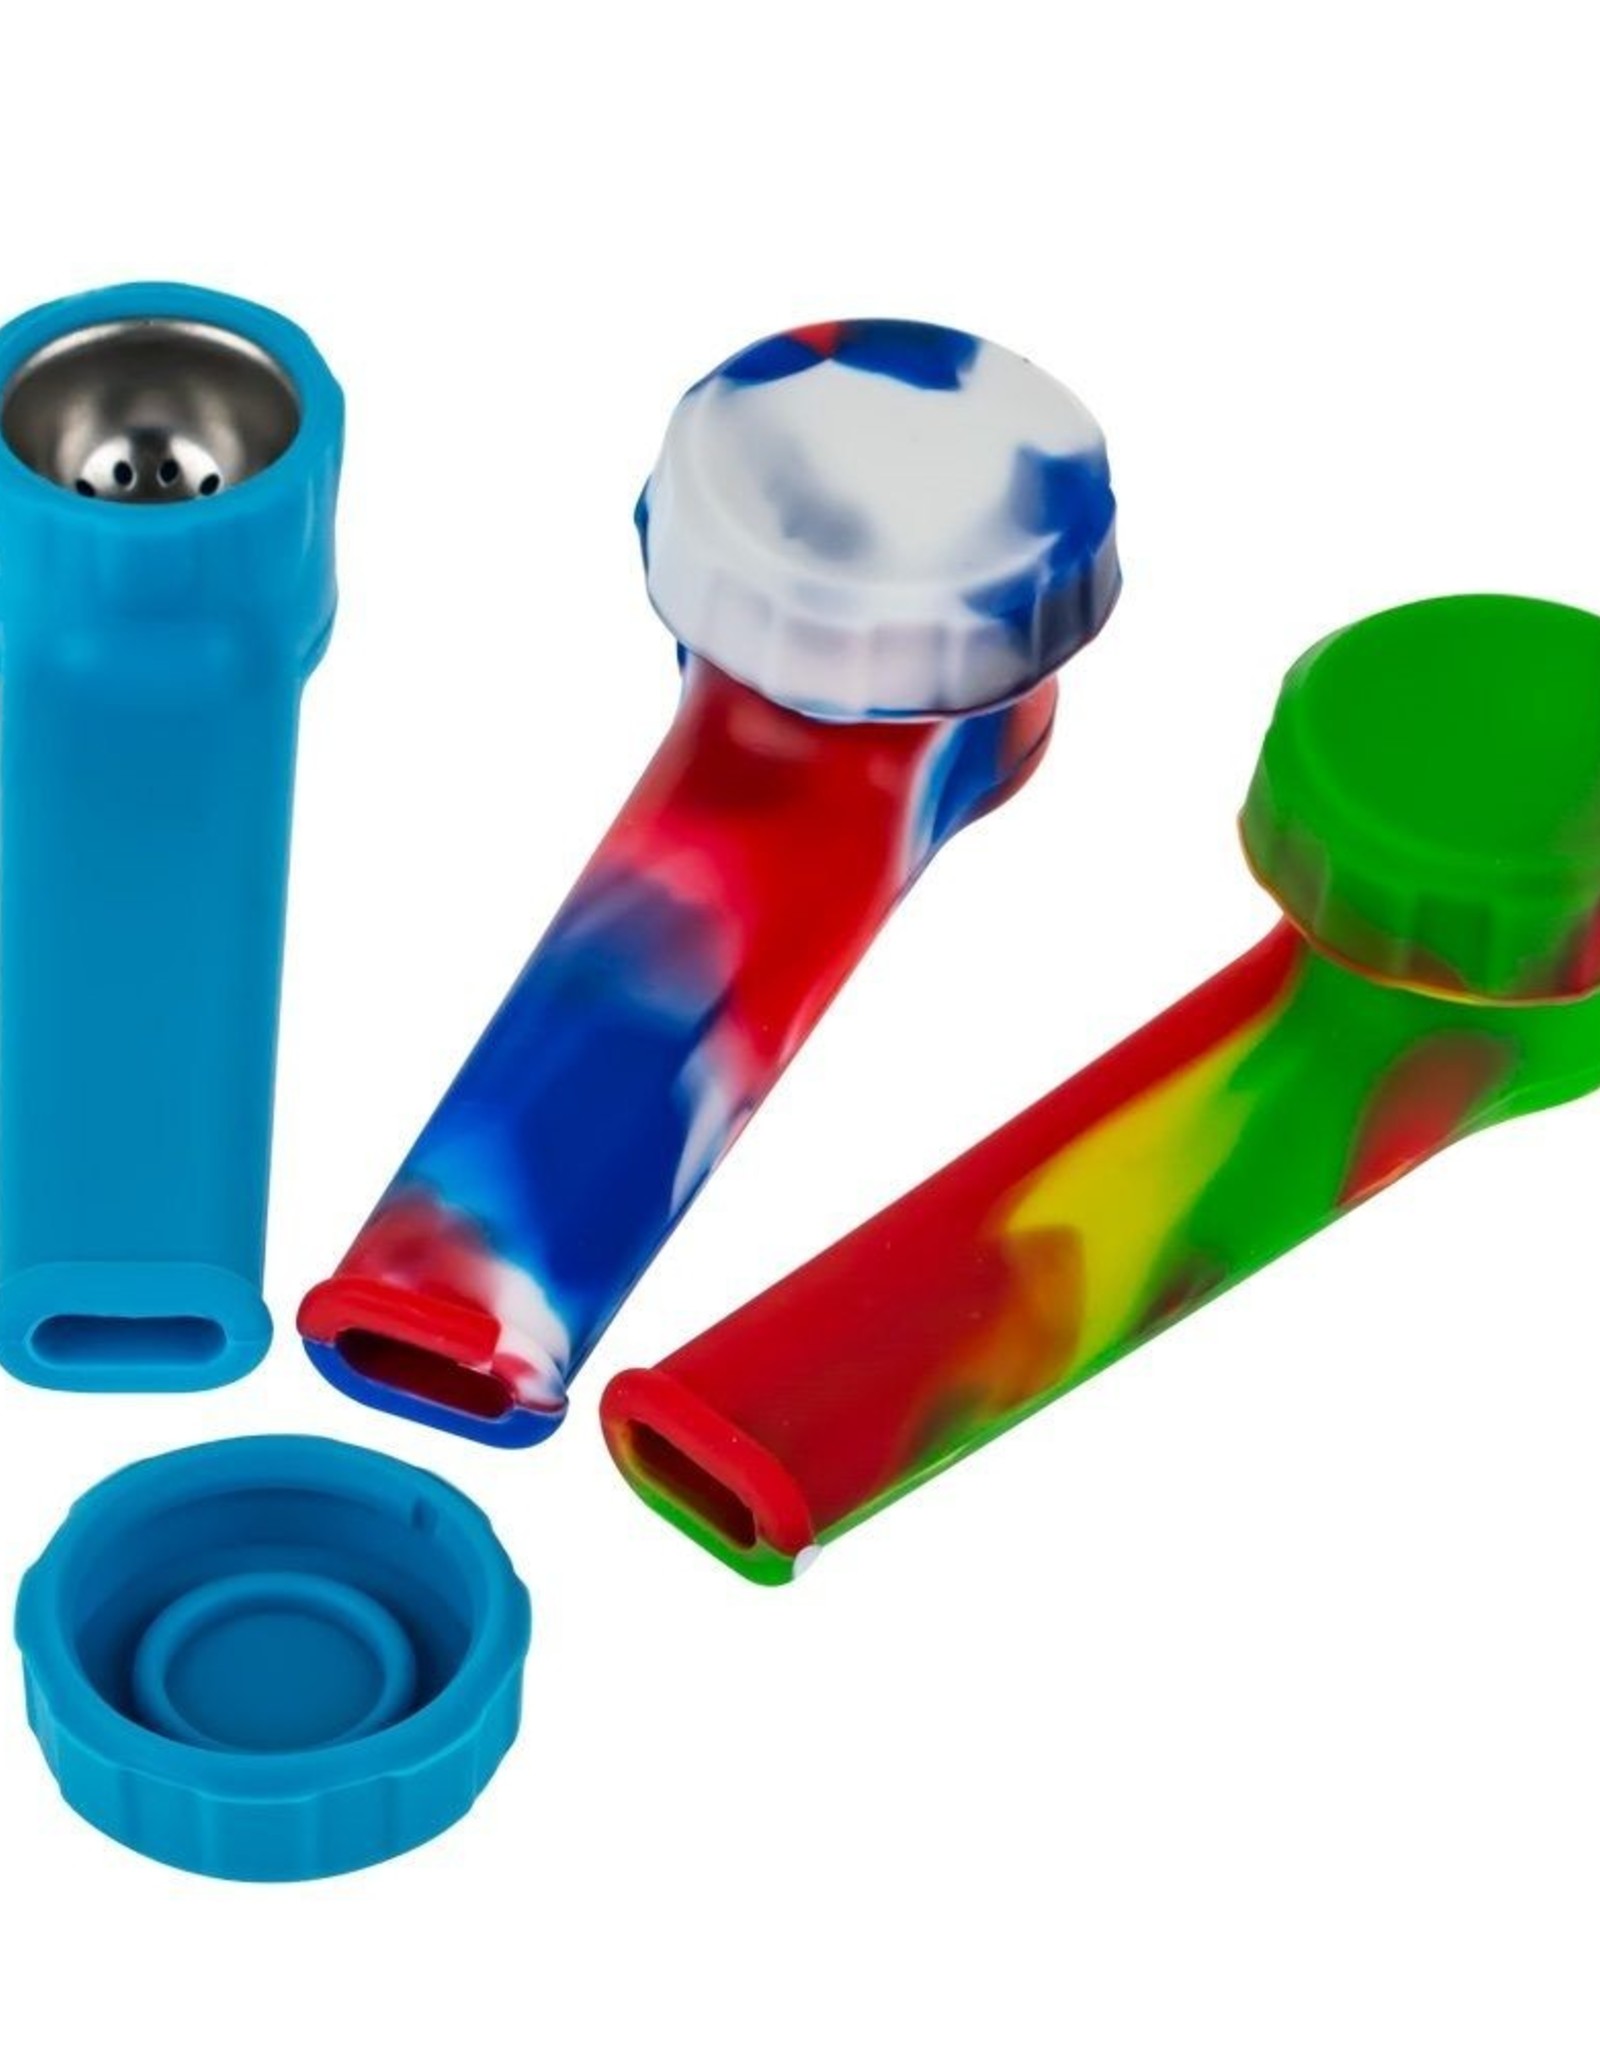 Silicone Pipe (S) w/ Metal Screen